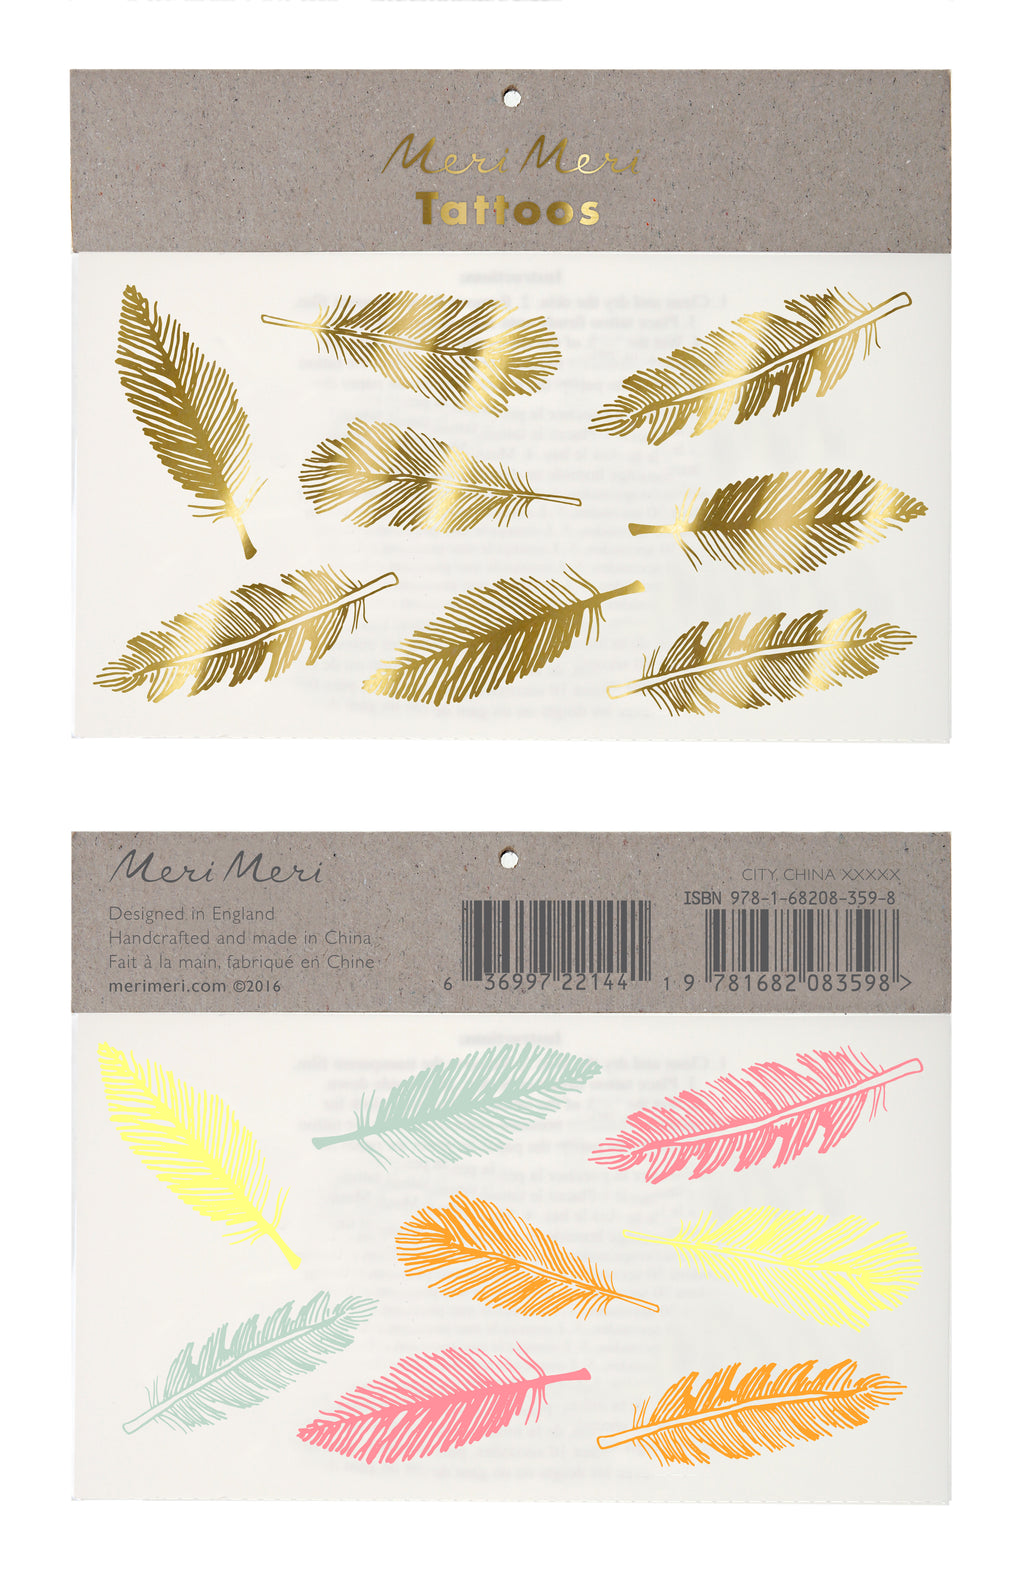 Neon And Gold Feather Tattoos